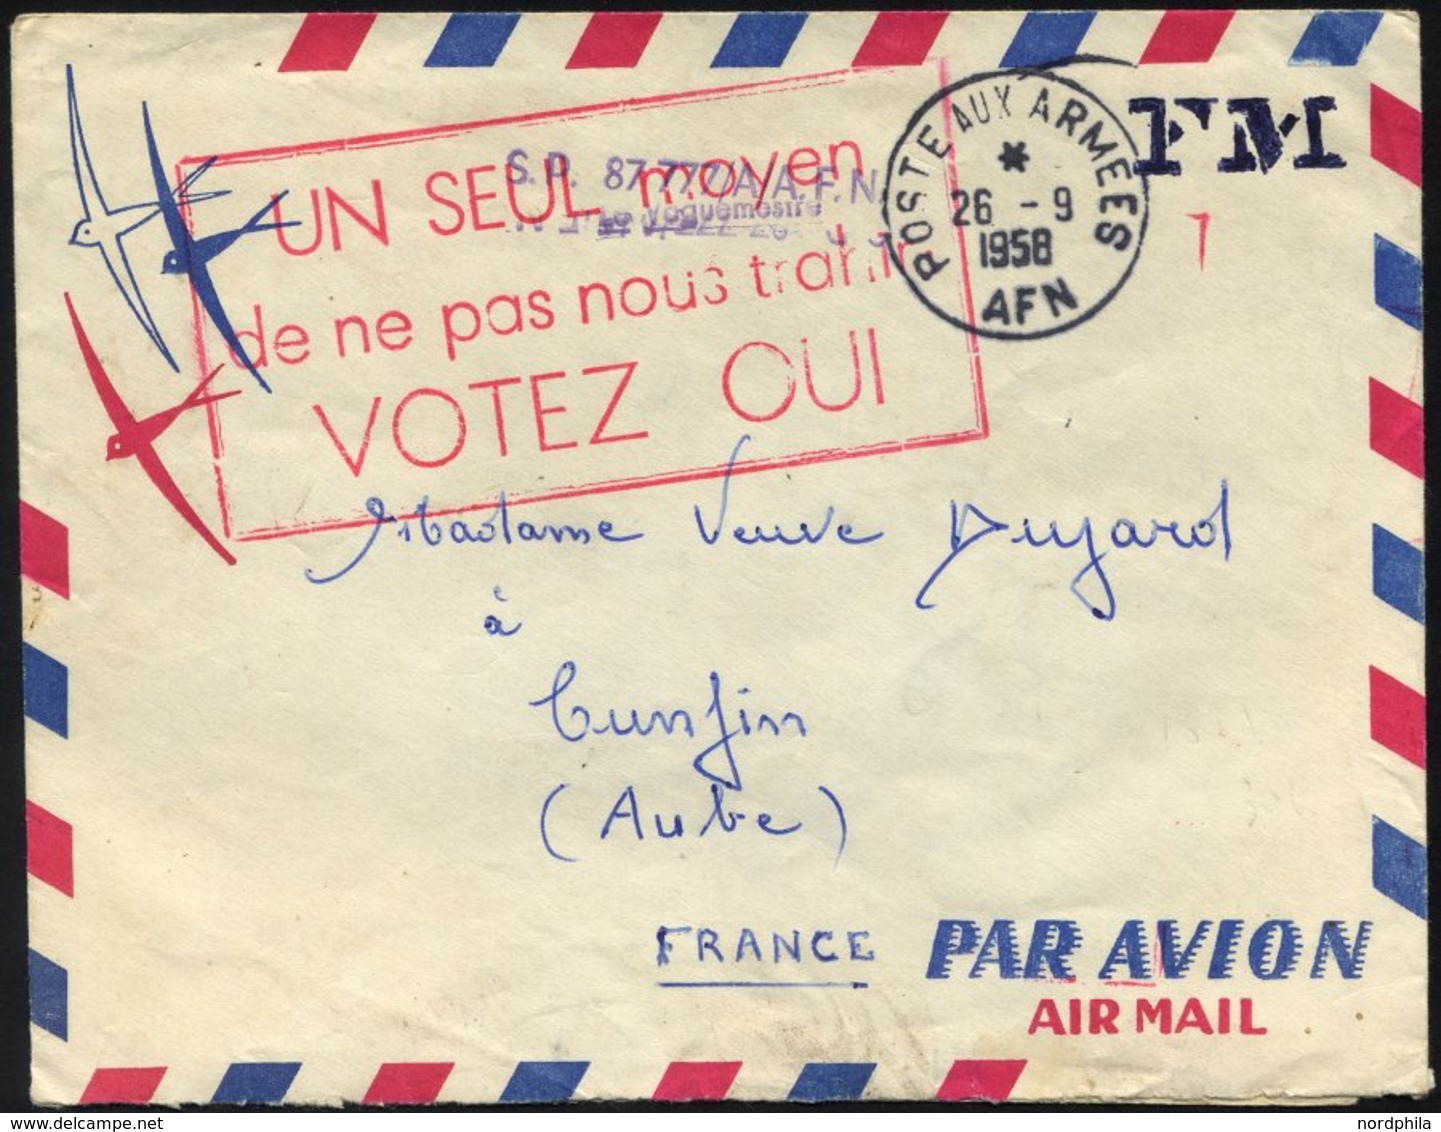 FRANKREICH FELDPOST 1958, K1 POSTE AUX ARMEES/A.F.N. Sowie Roter Politischer R3 UN SEUL Moyen/de Ne Pas Nous Trahir/VOTE - Military Postmarks From 1900 (out Of Wars Periods)